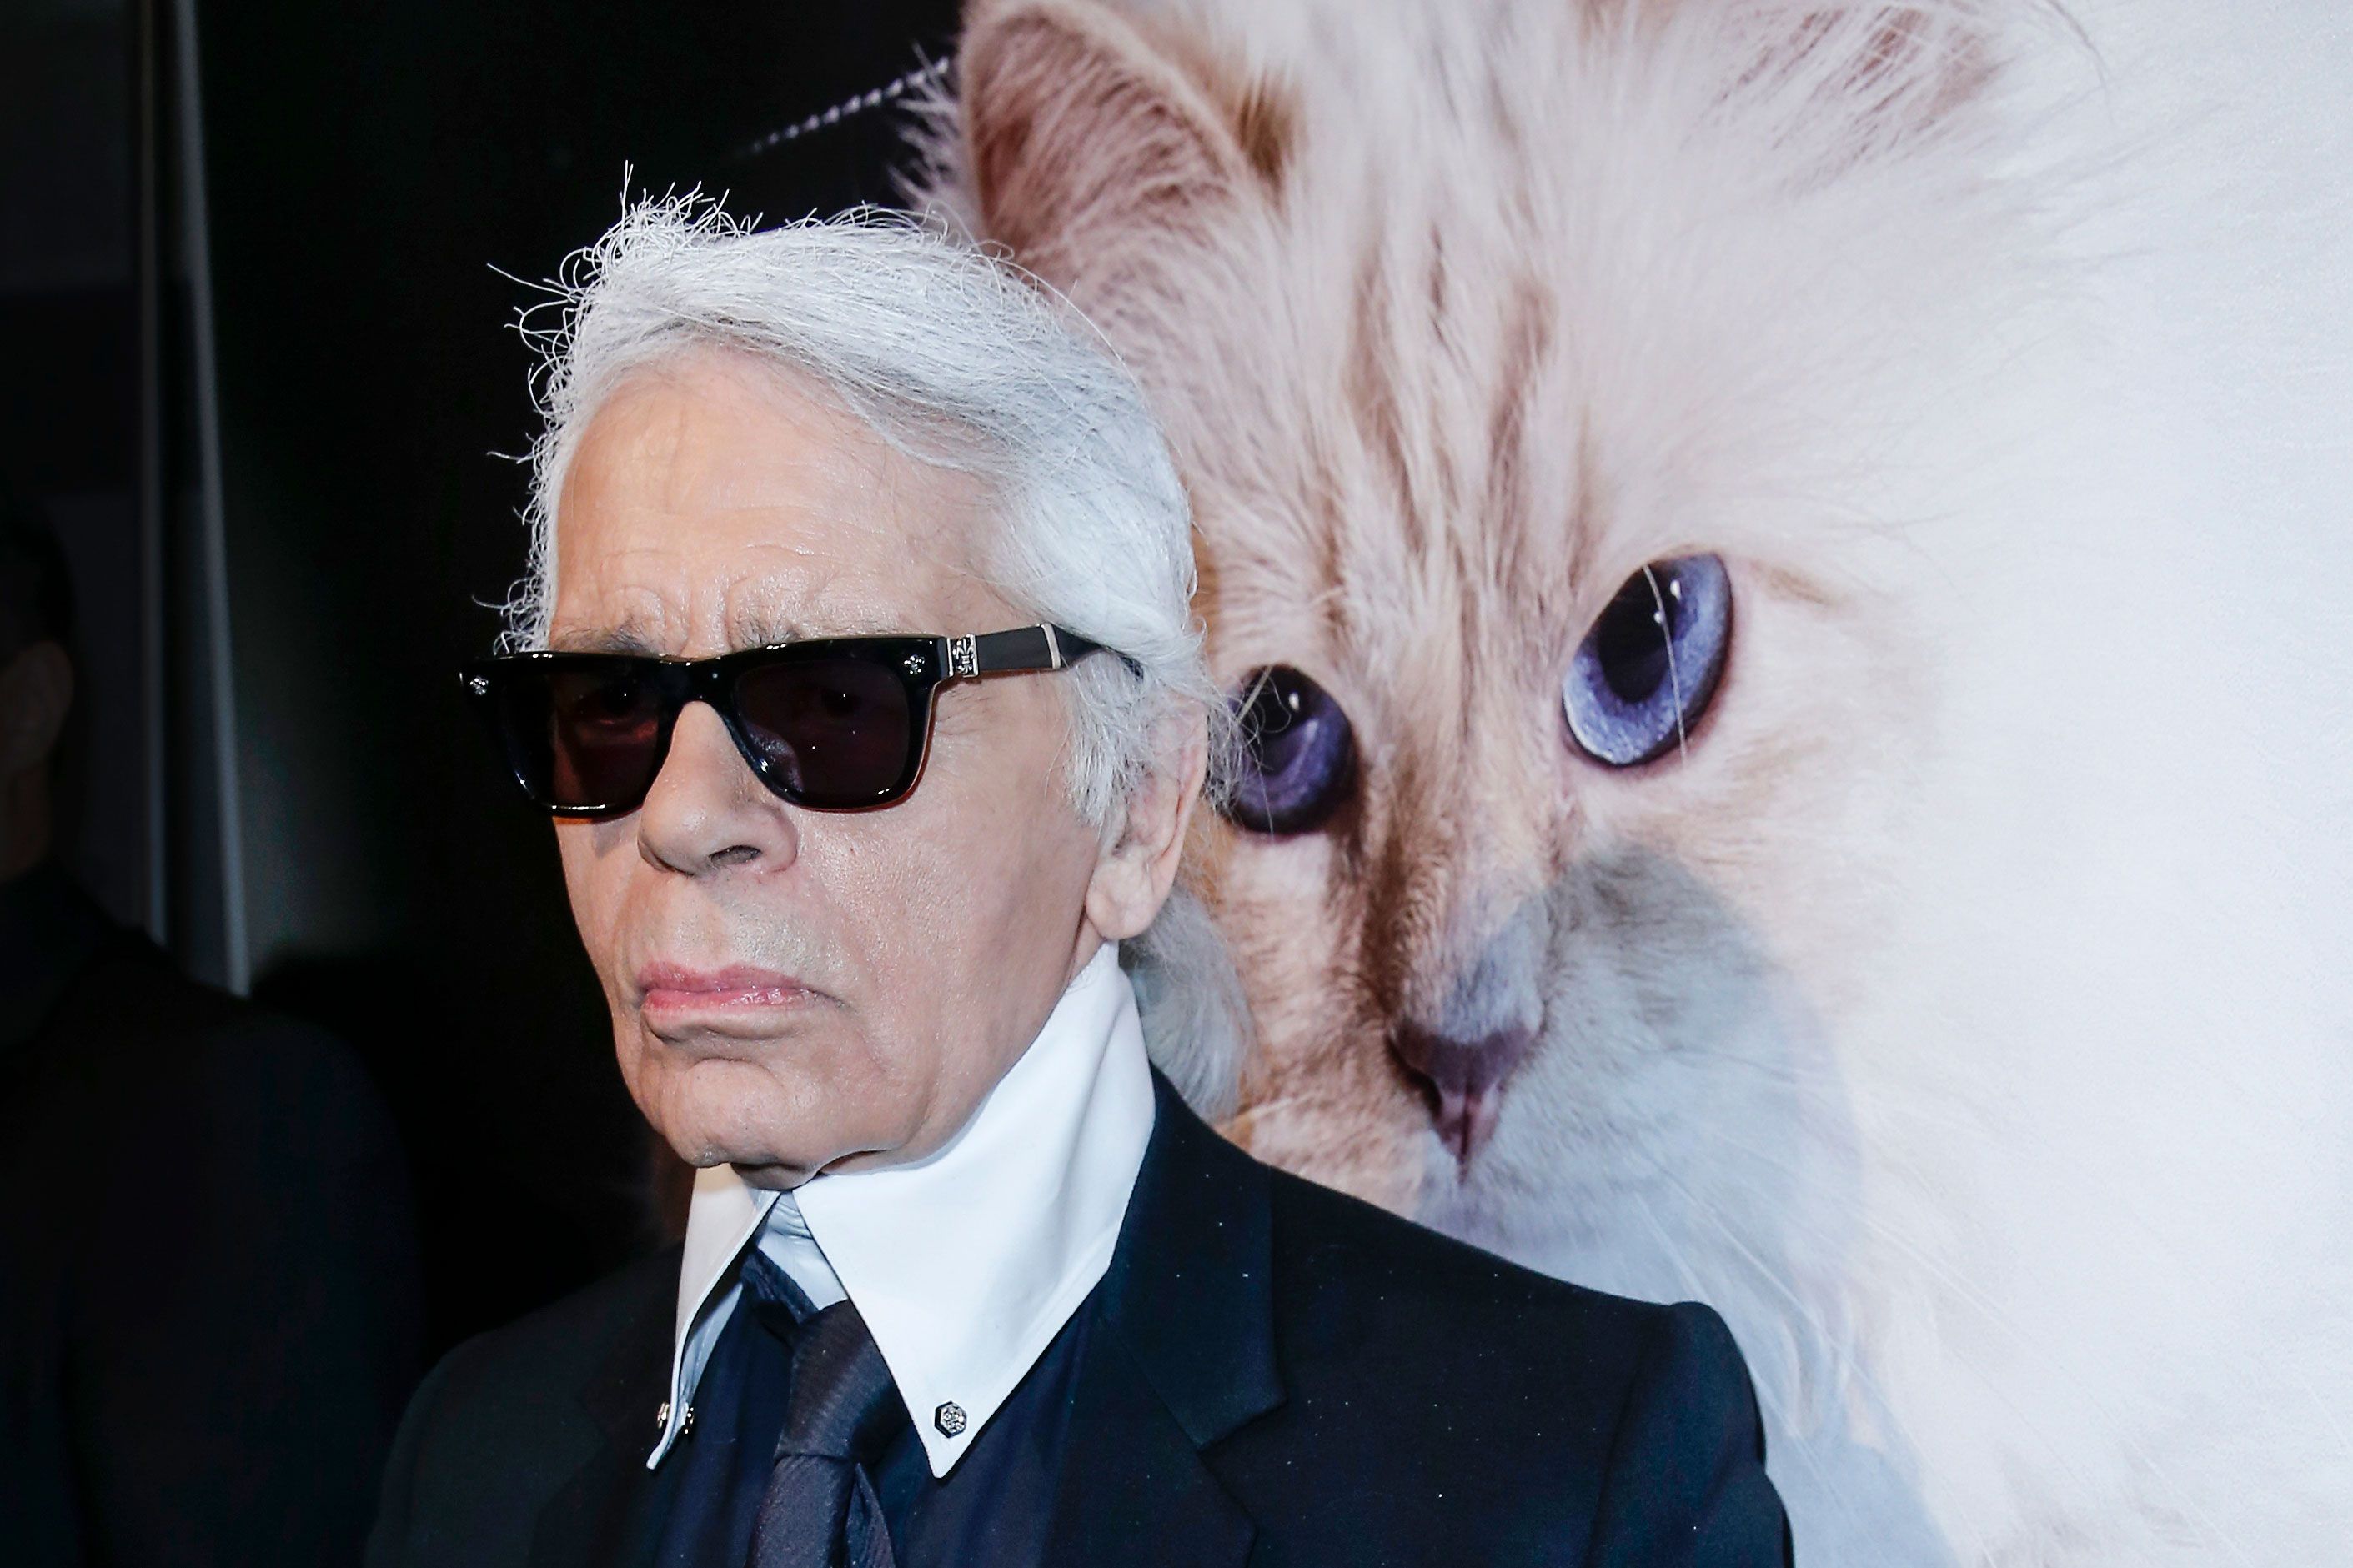 Karl Lagerfeld's cat designs her own bed (in a way)